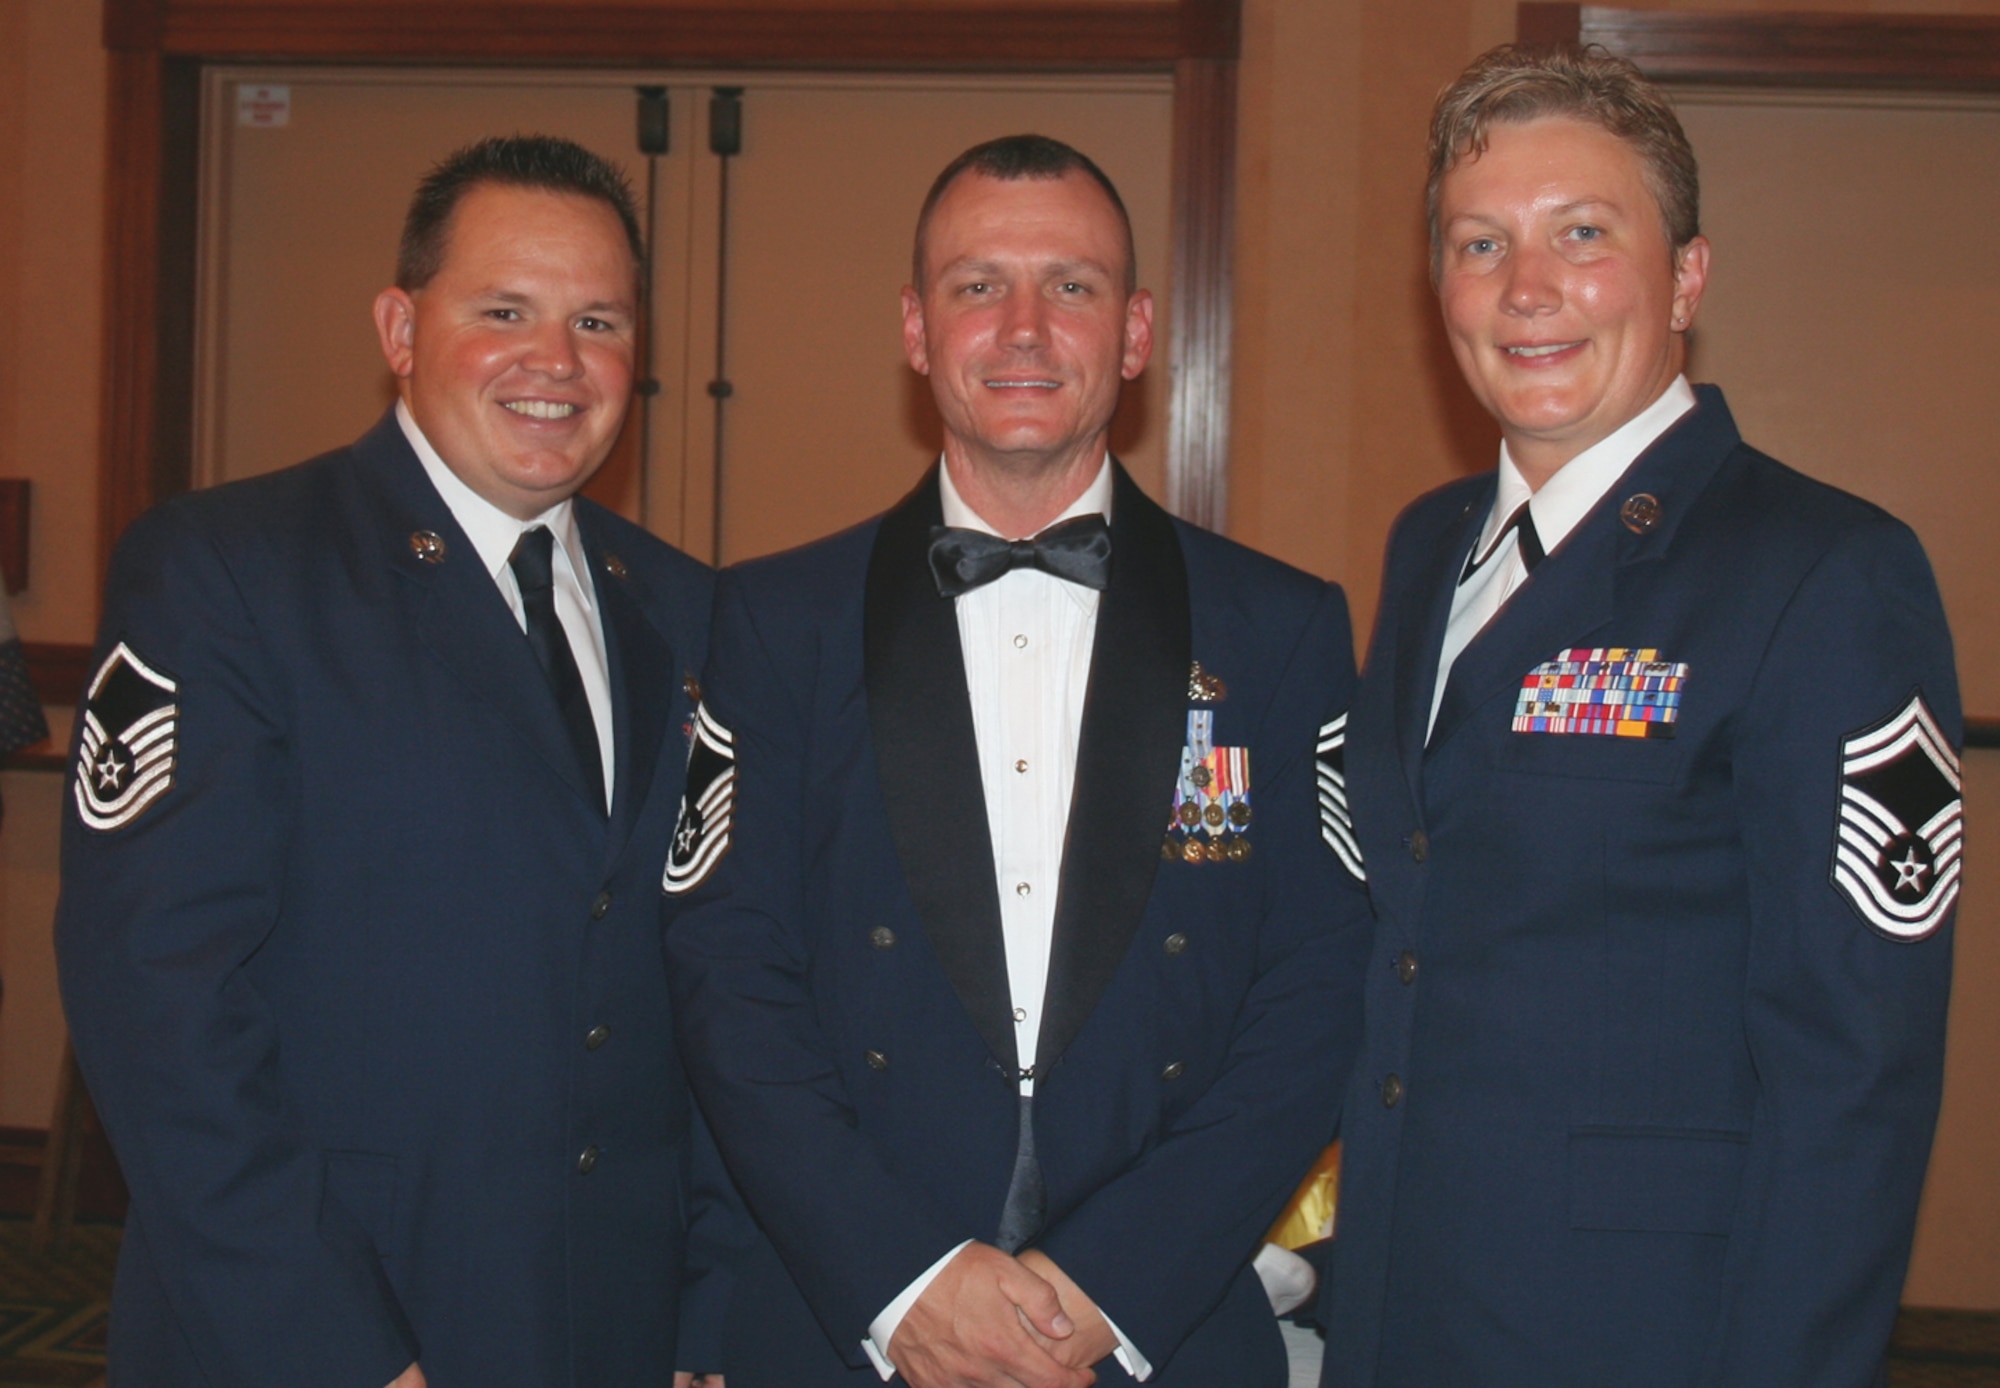 Master Sgt. Richard Champ, Senior Master Sgt. Robert Wilson and Senior Master Sgt. Angela Varvel attend the Awards Banquet while at McGee Tyson, Tenn. for the NCOAGA 40th anniversary conference.